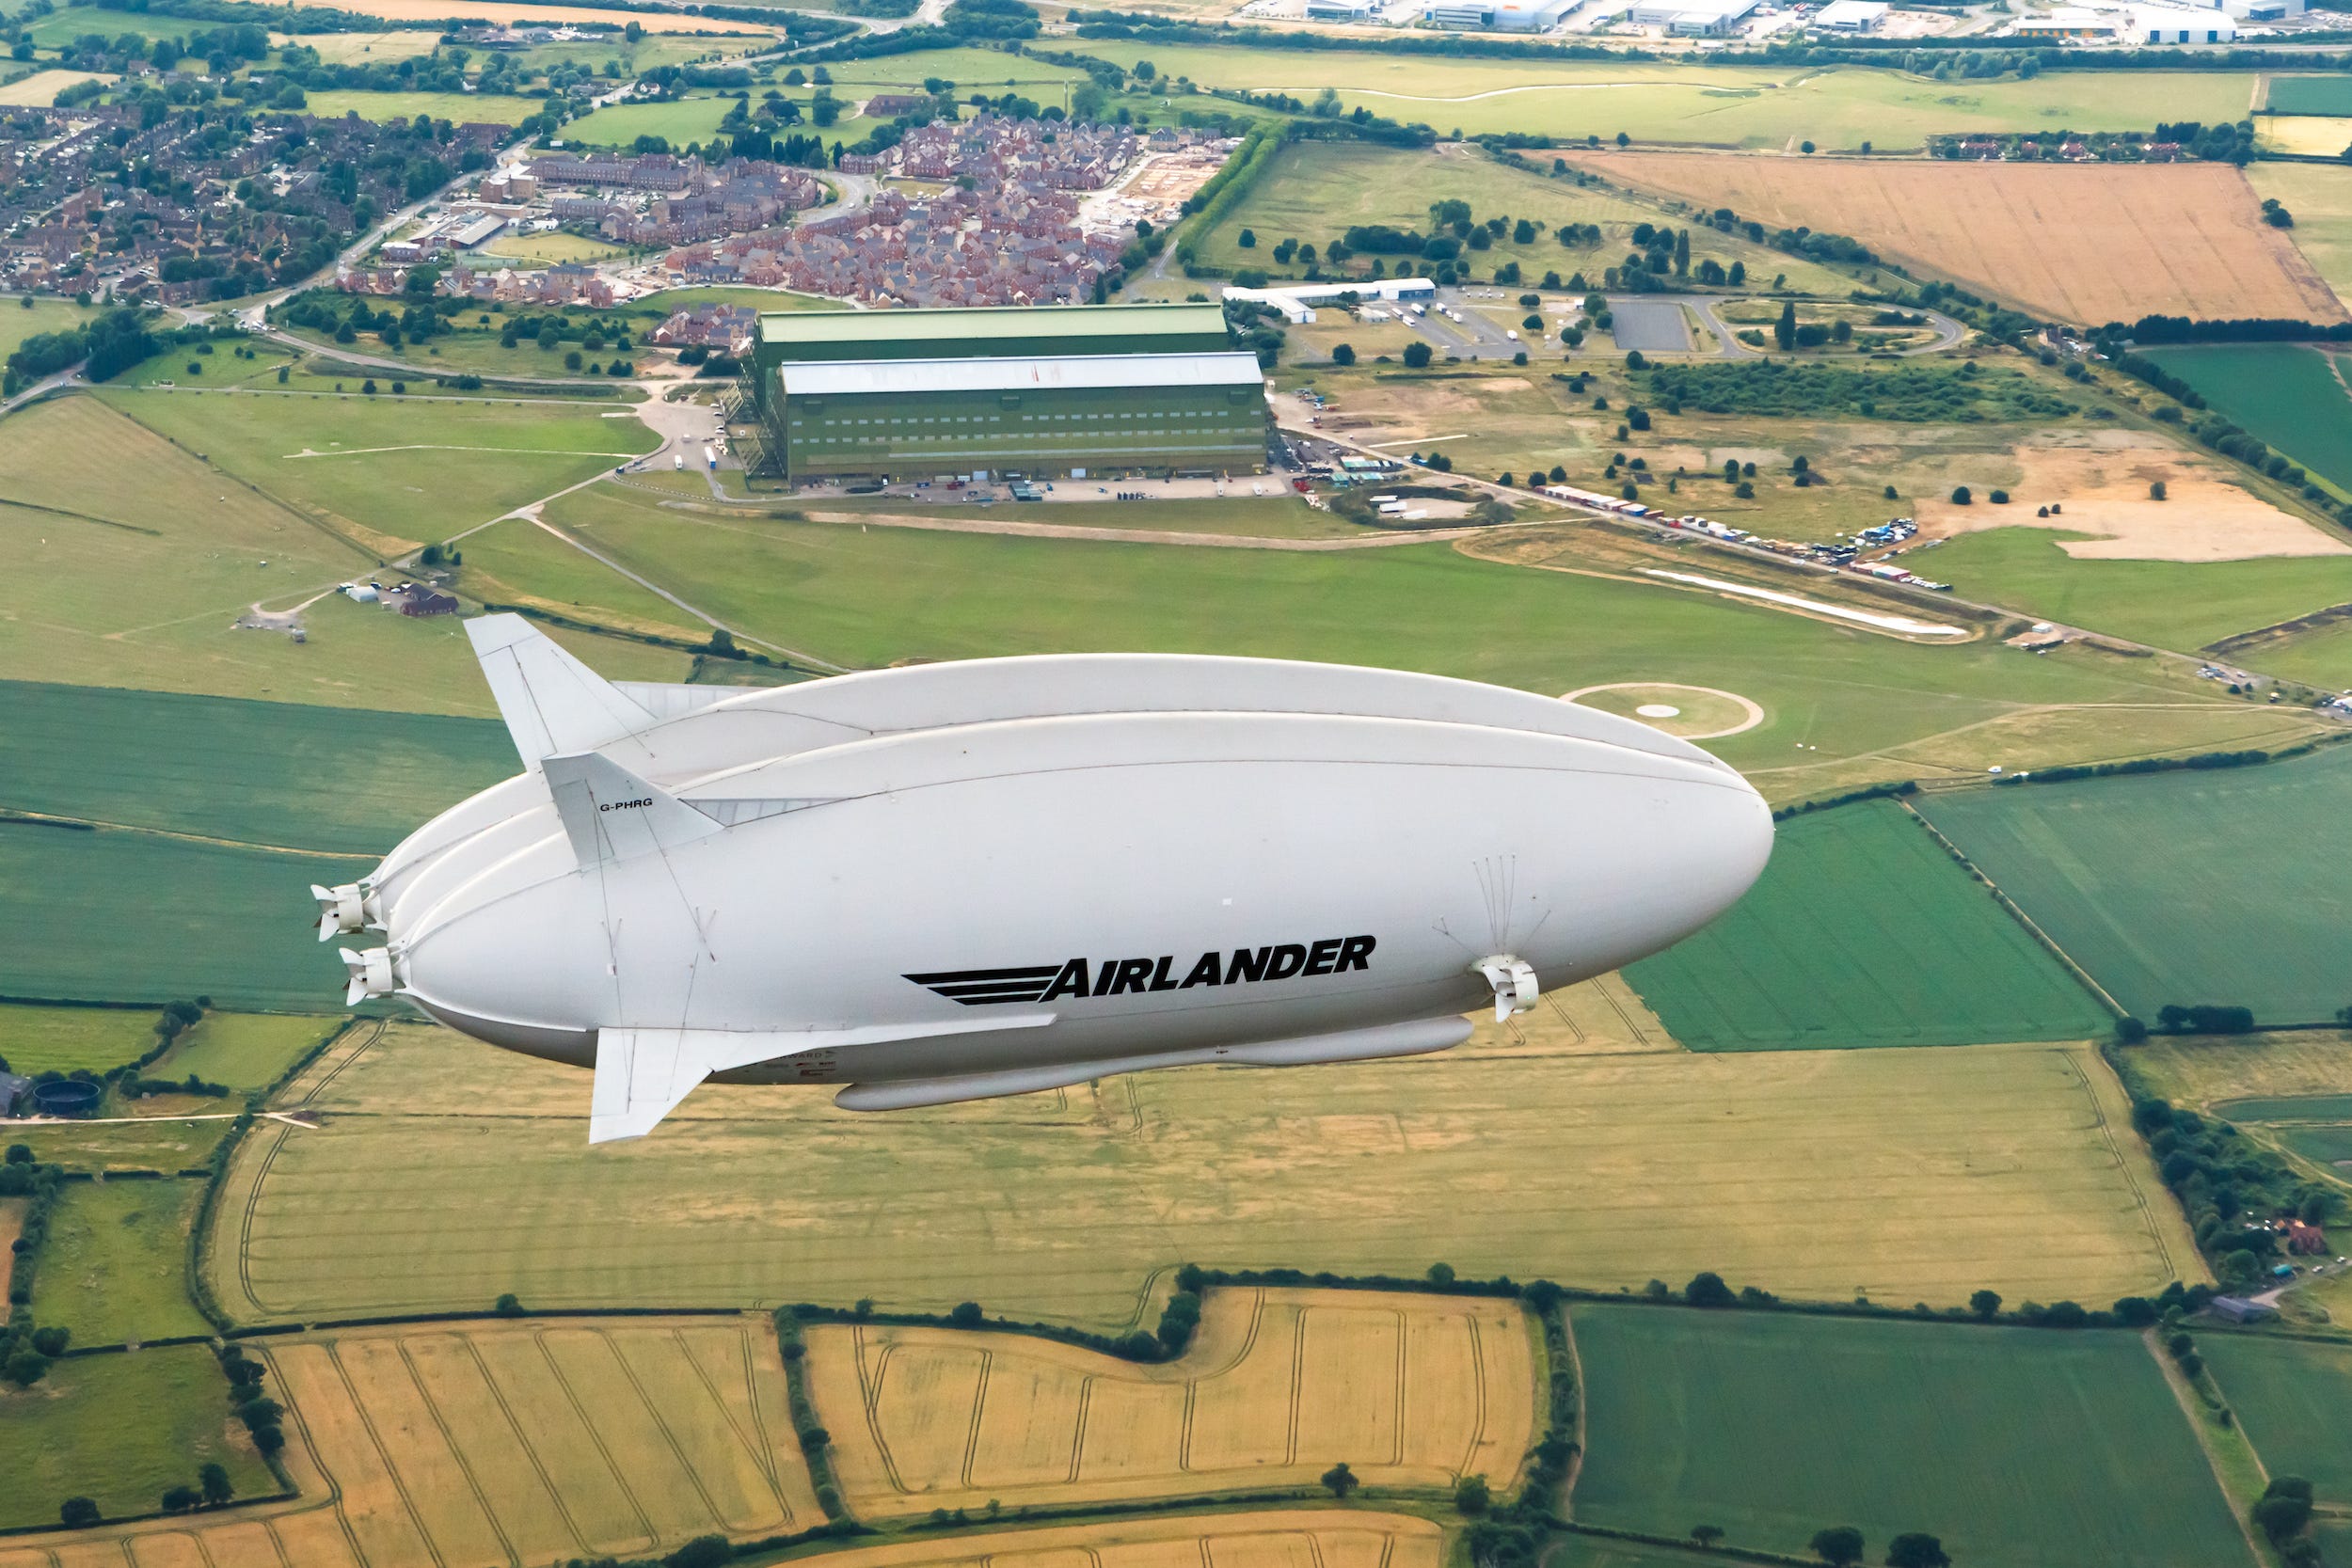 The Airlander 10 flying over fields